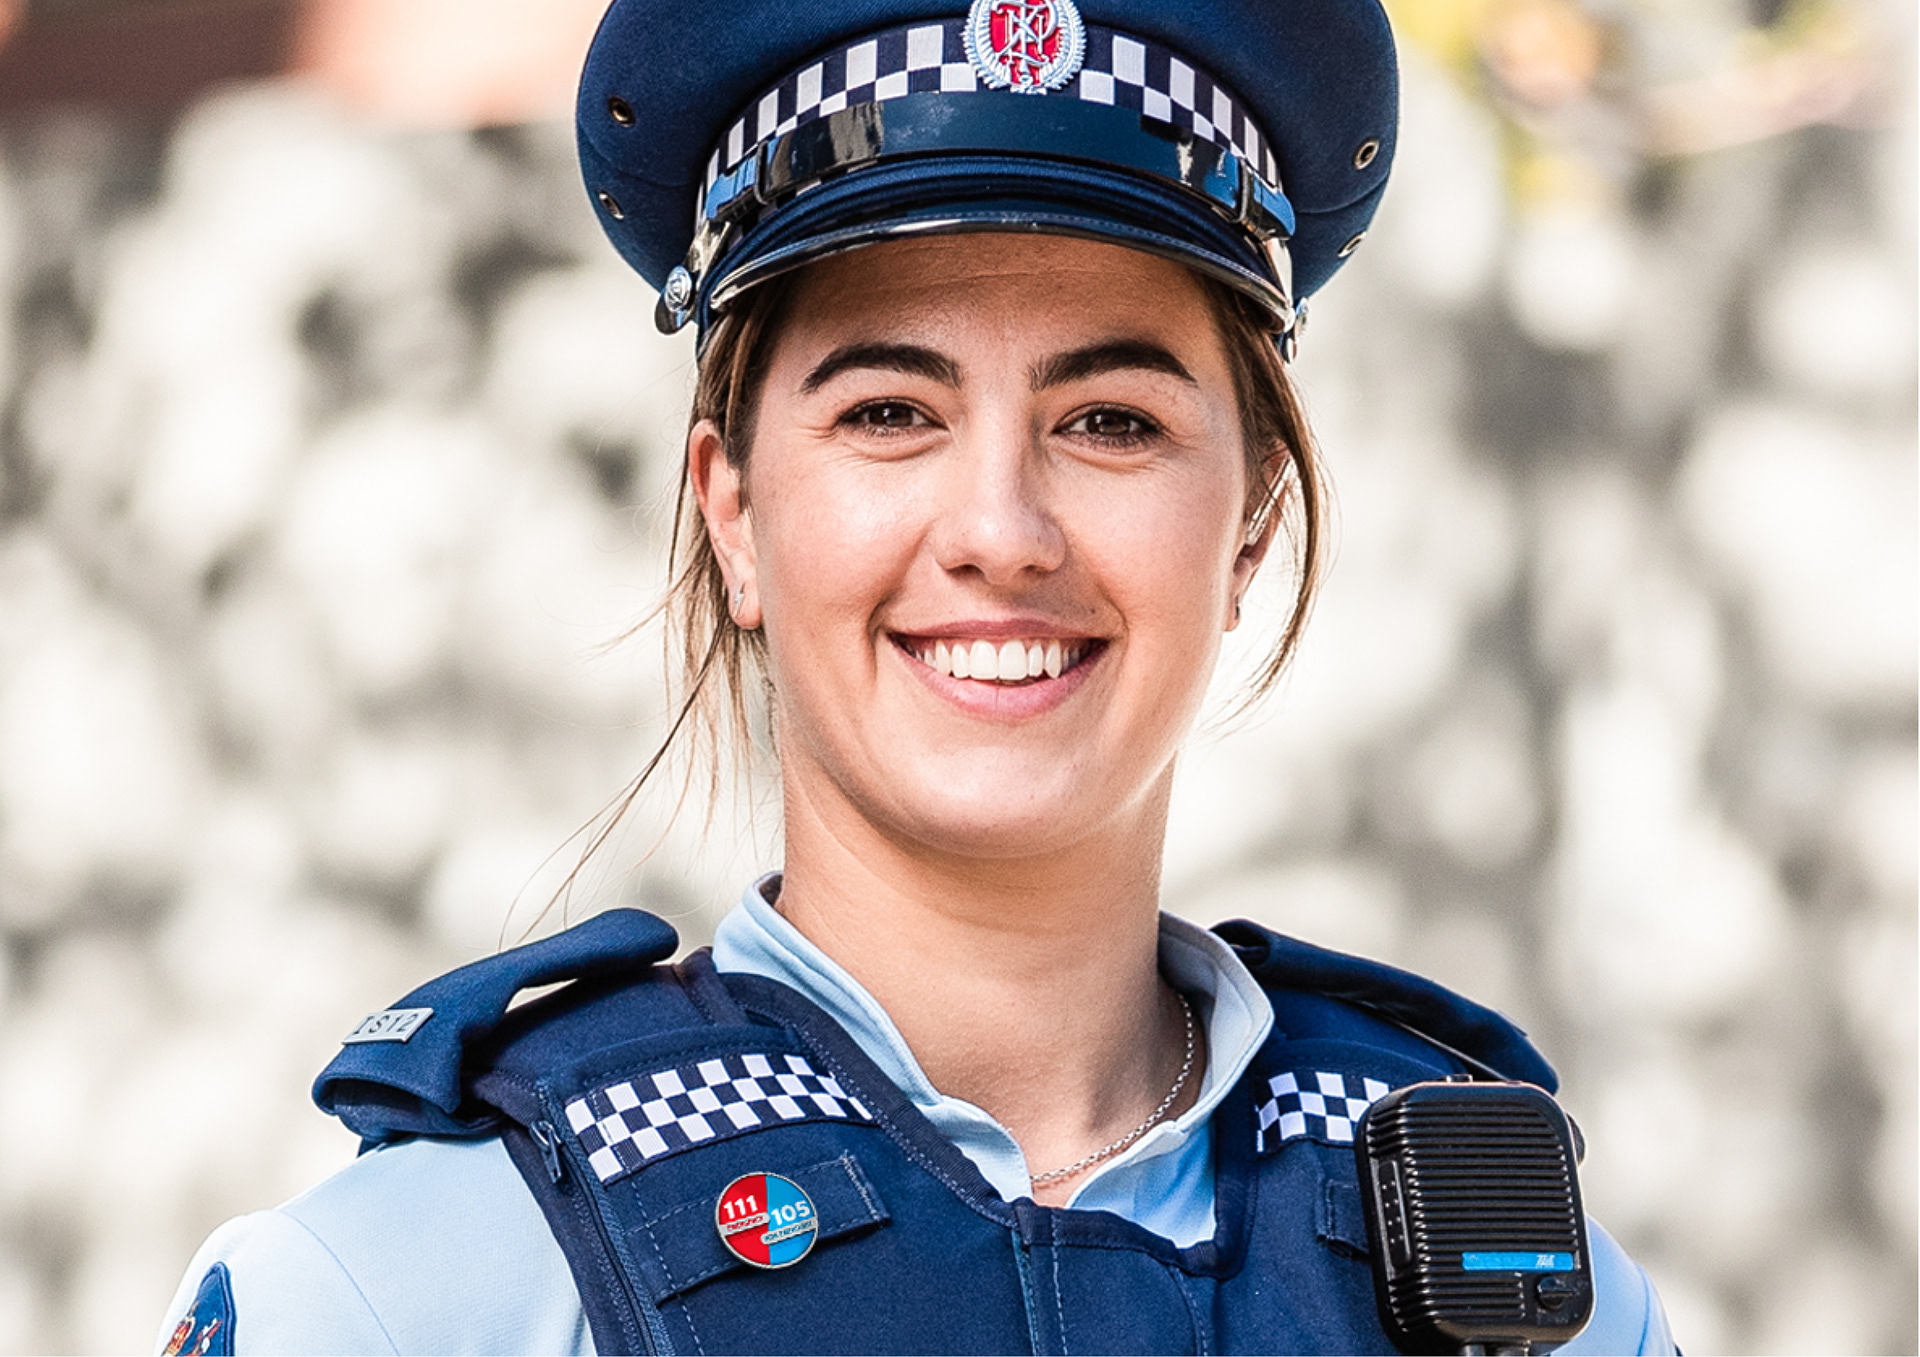 New Zealand Police - 105 Non-Emergency Number.